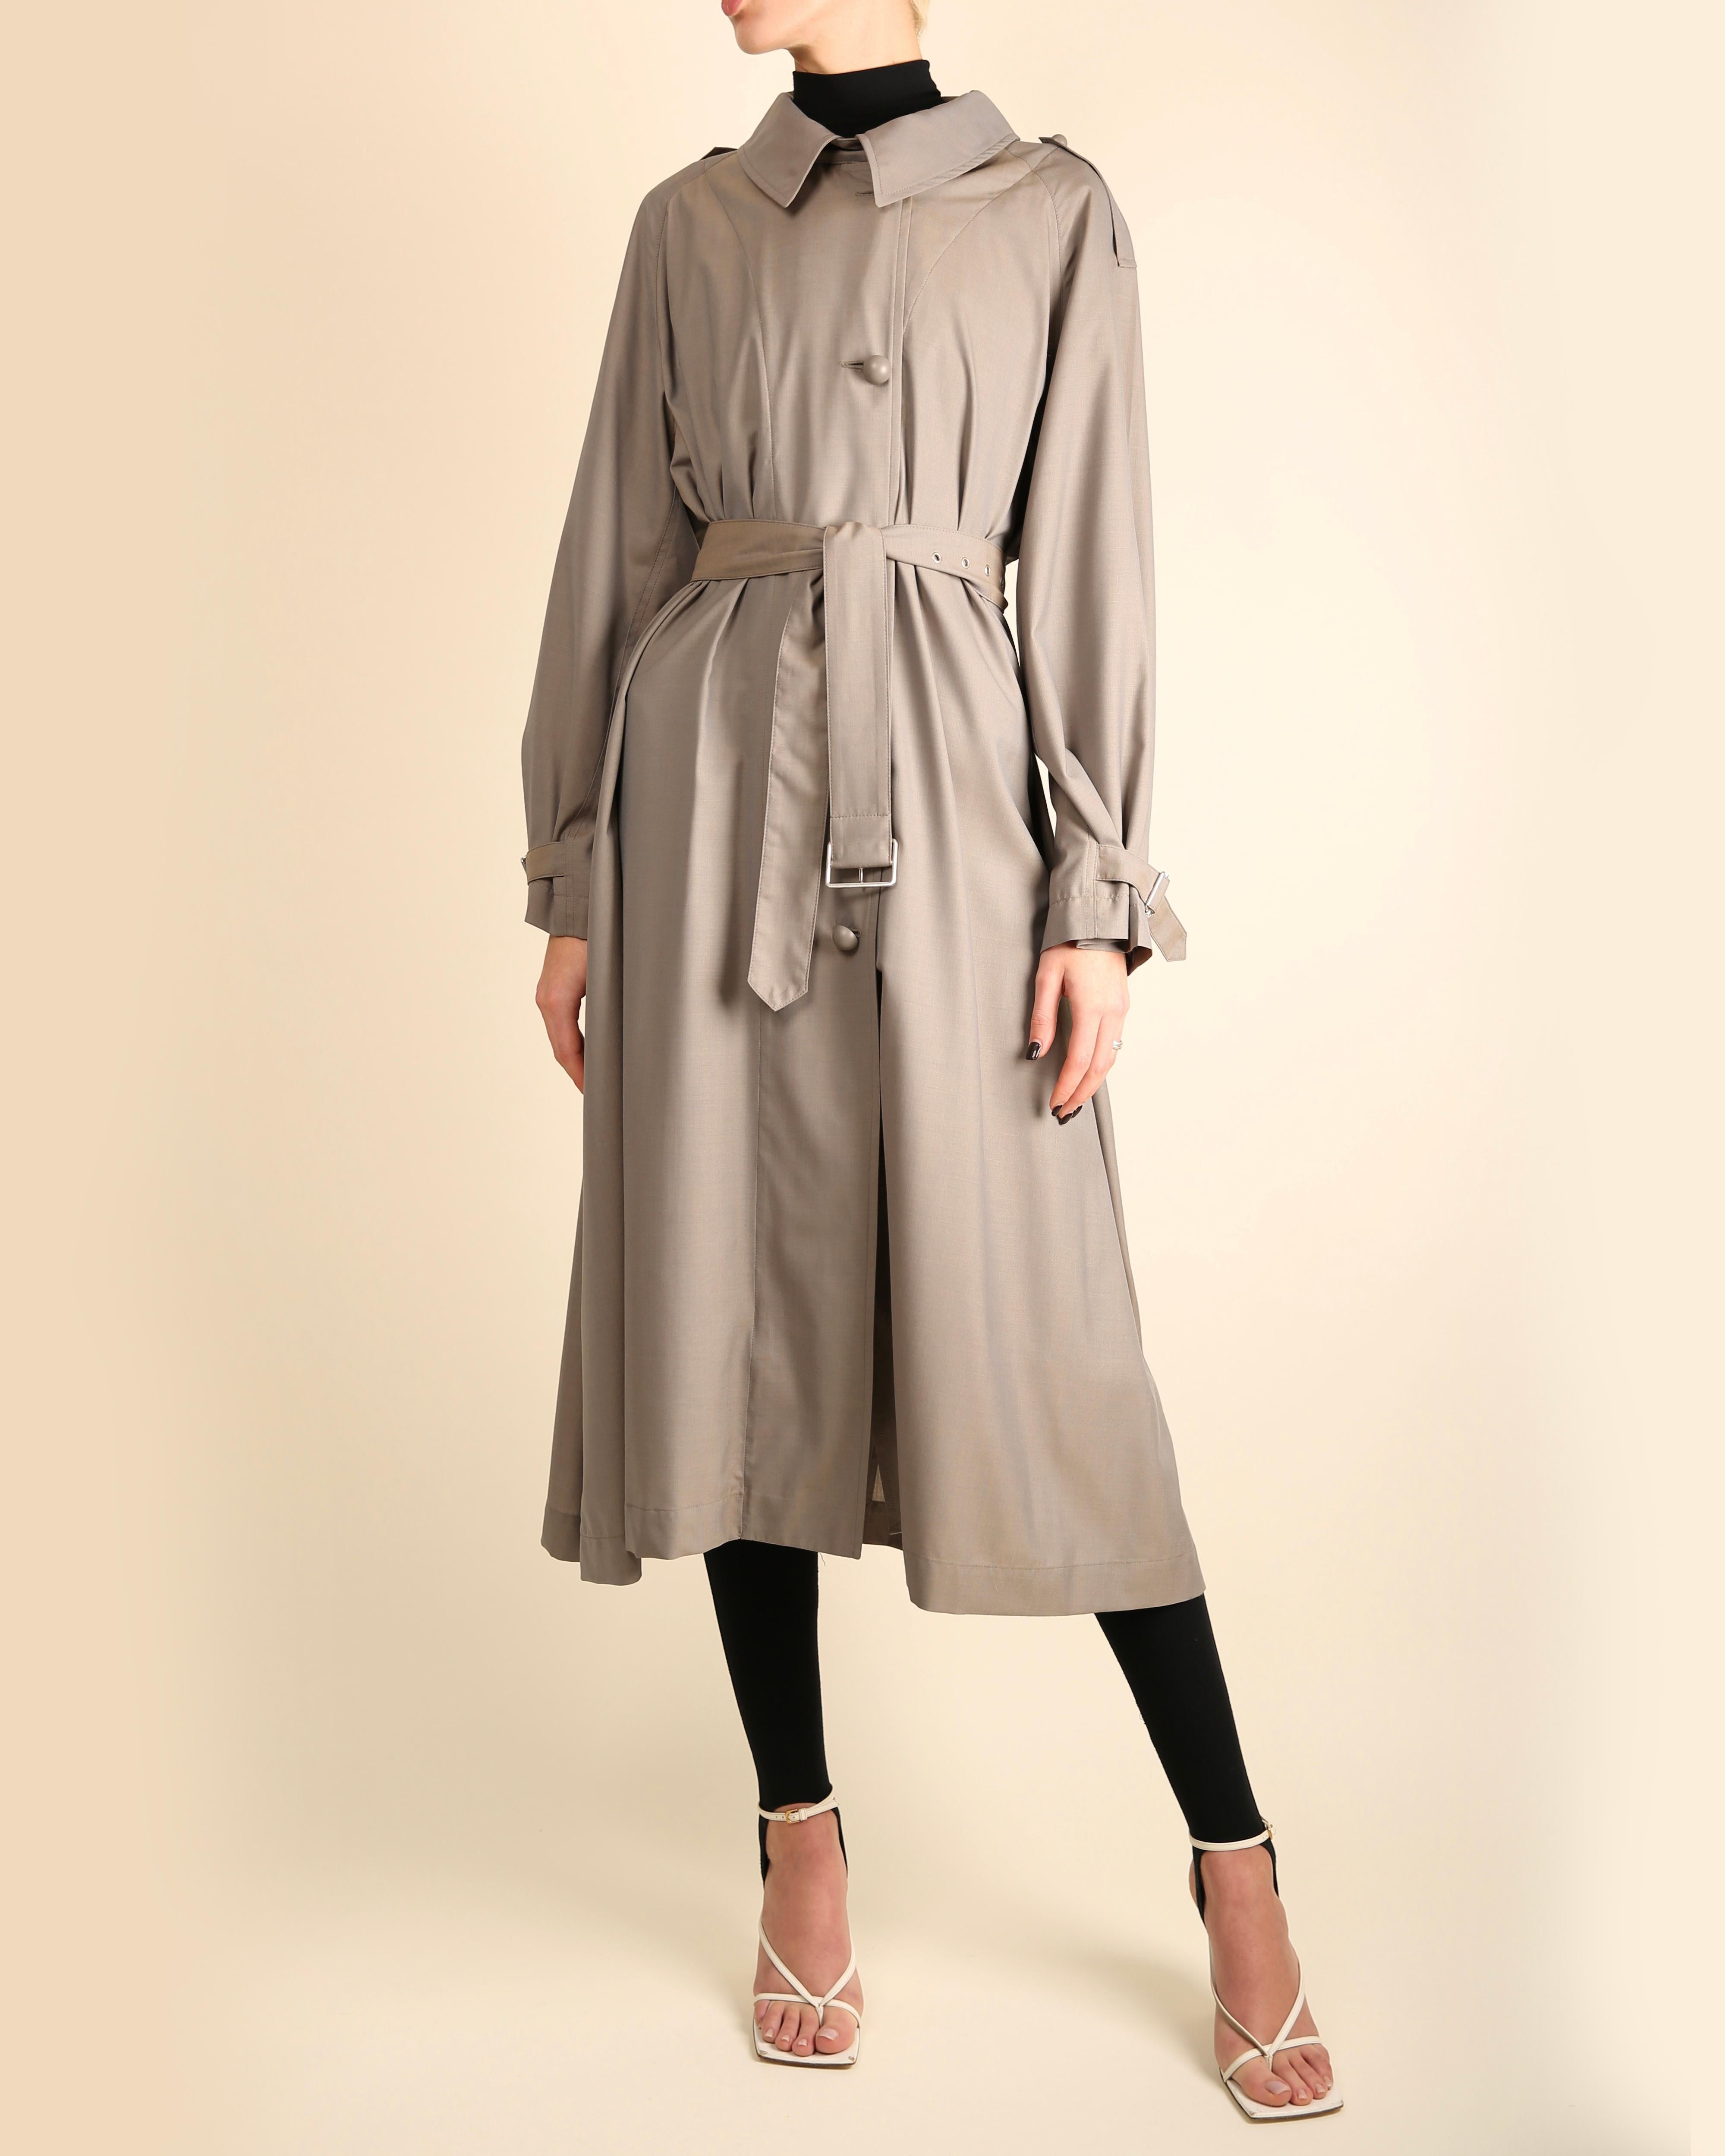 Celine Fall 2017 grey oversized maxi belted wool cashmere trench coat FR 36 2